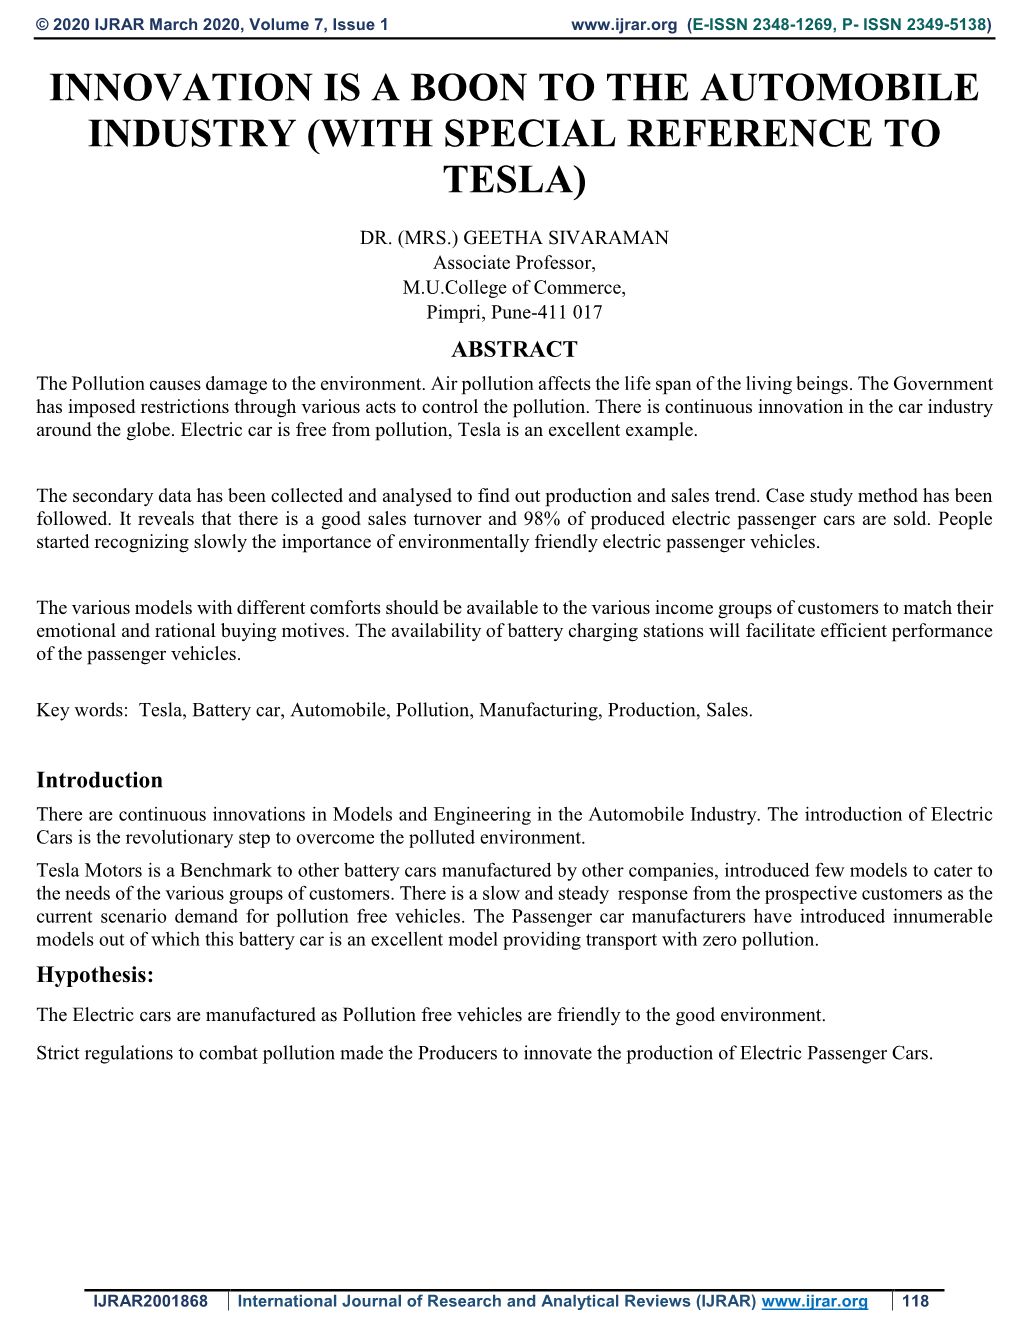 With Special Reference to Tesla)